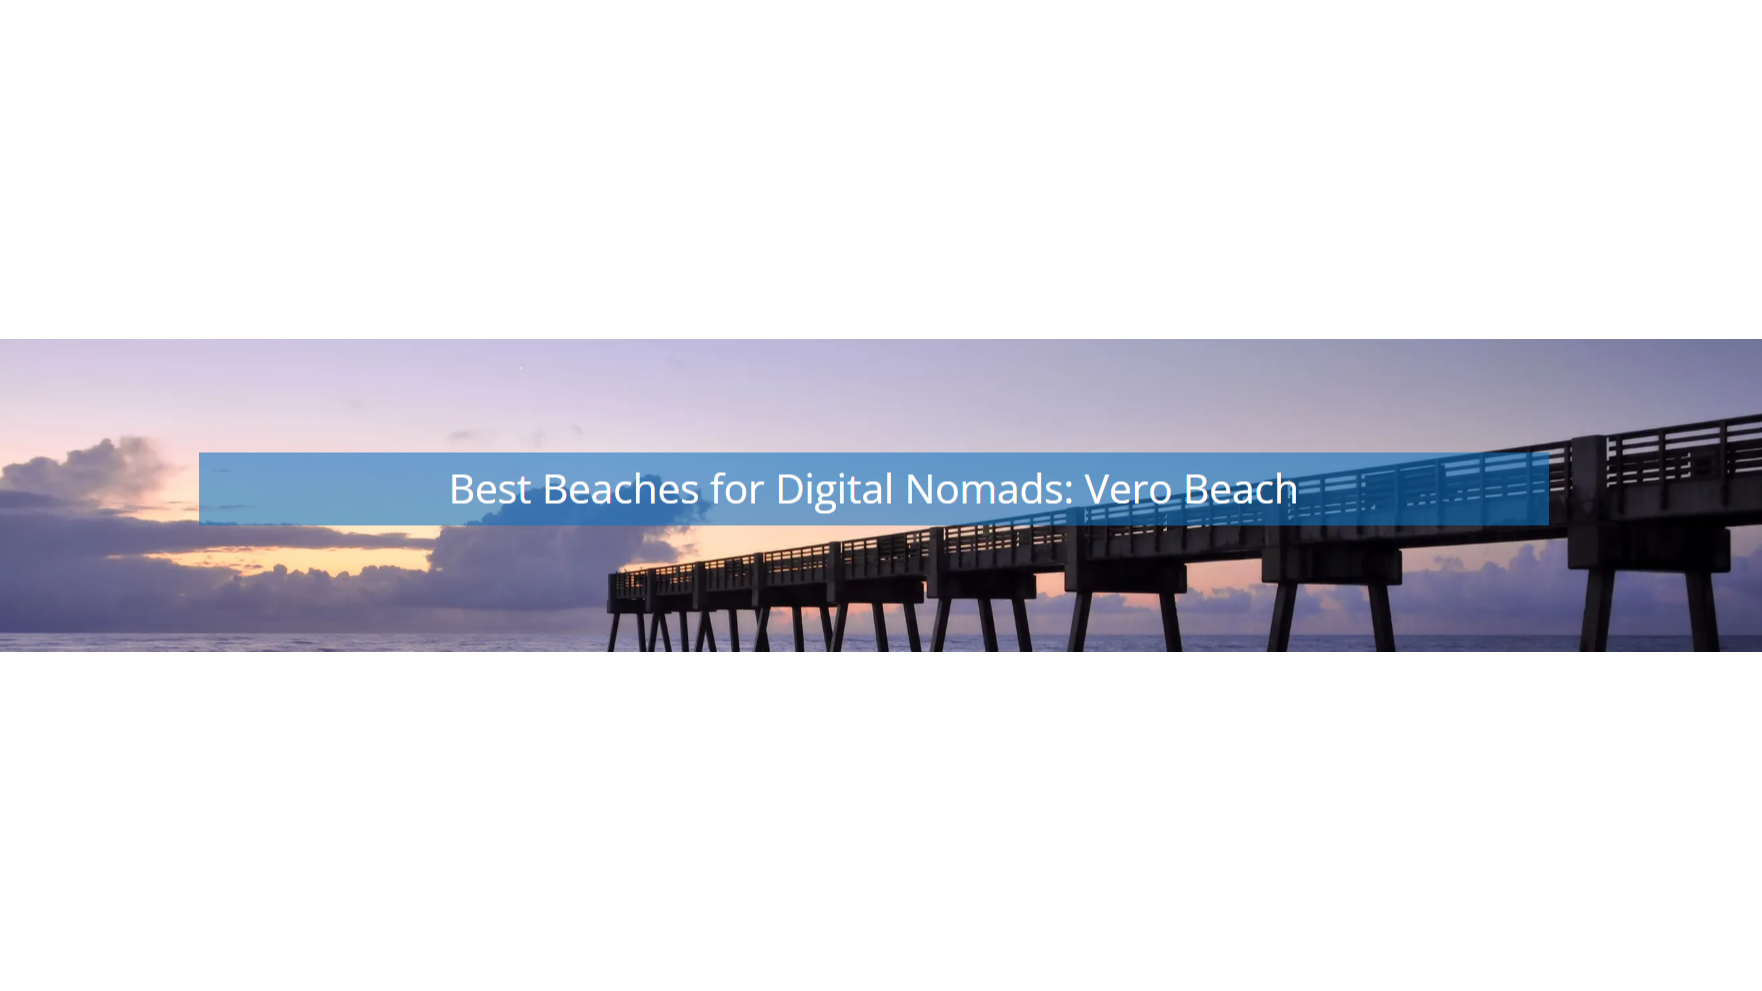 Plan Remote Work In Vero Beach With This Food & Sightseeing Digital Nomad Guide